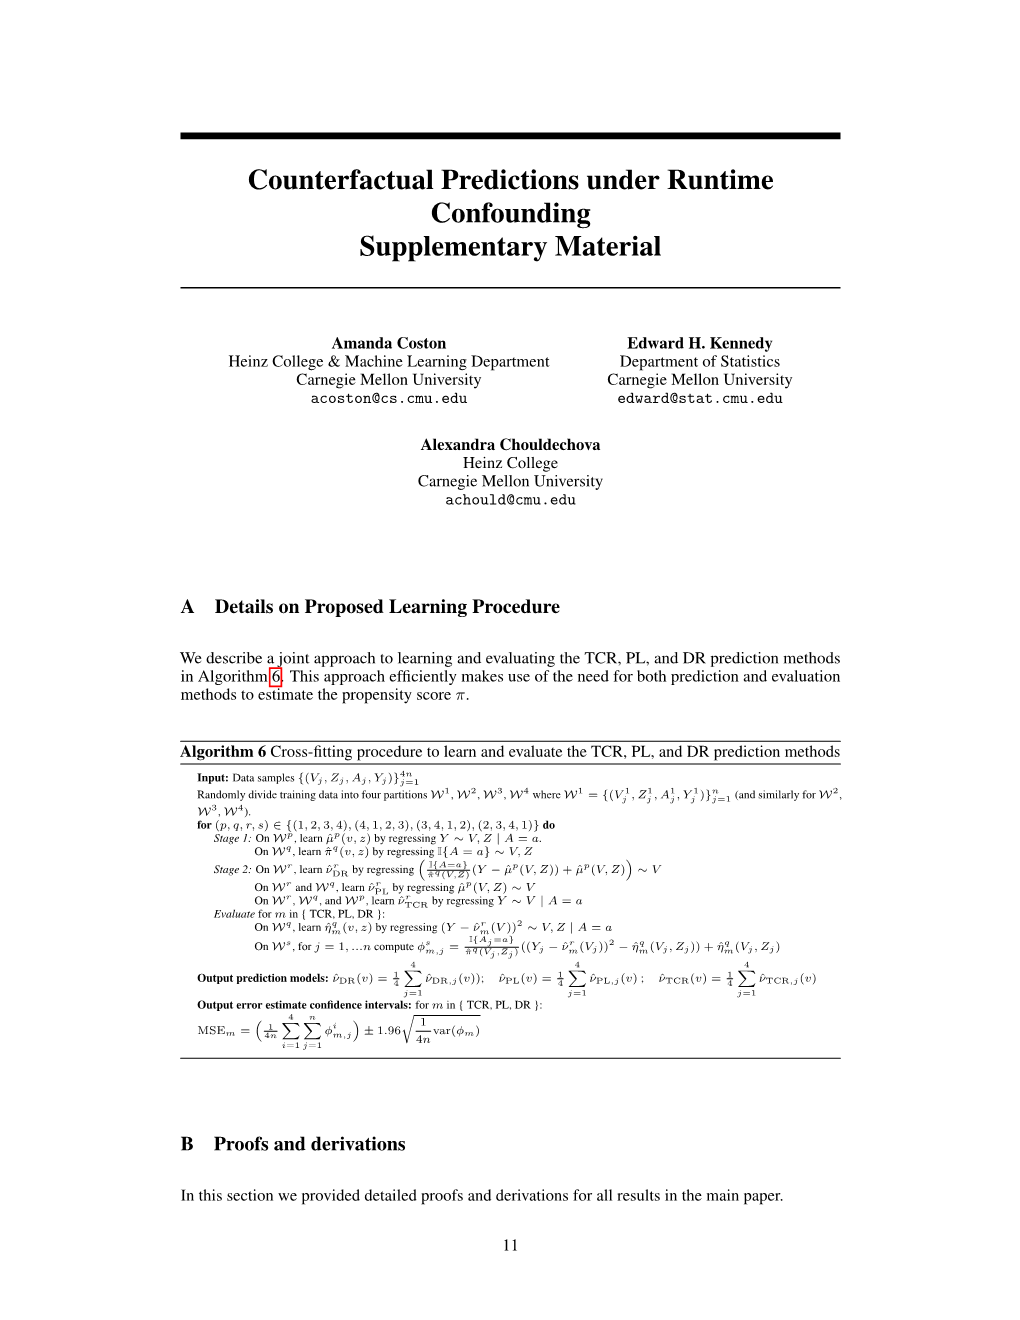 Counterfactual Predictions Under Runtime Confounding Supplementary Material